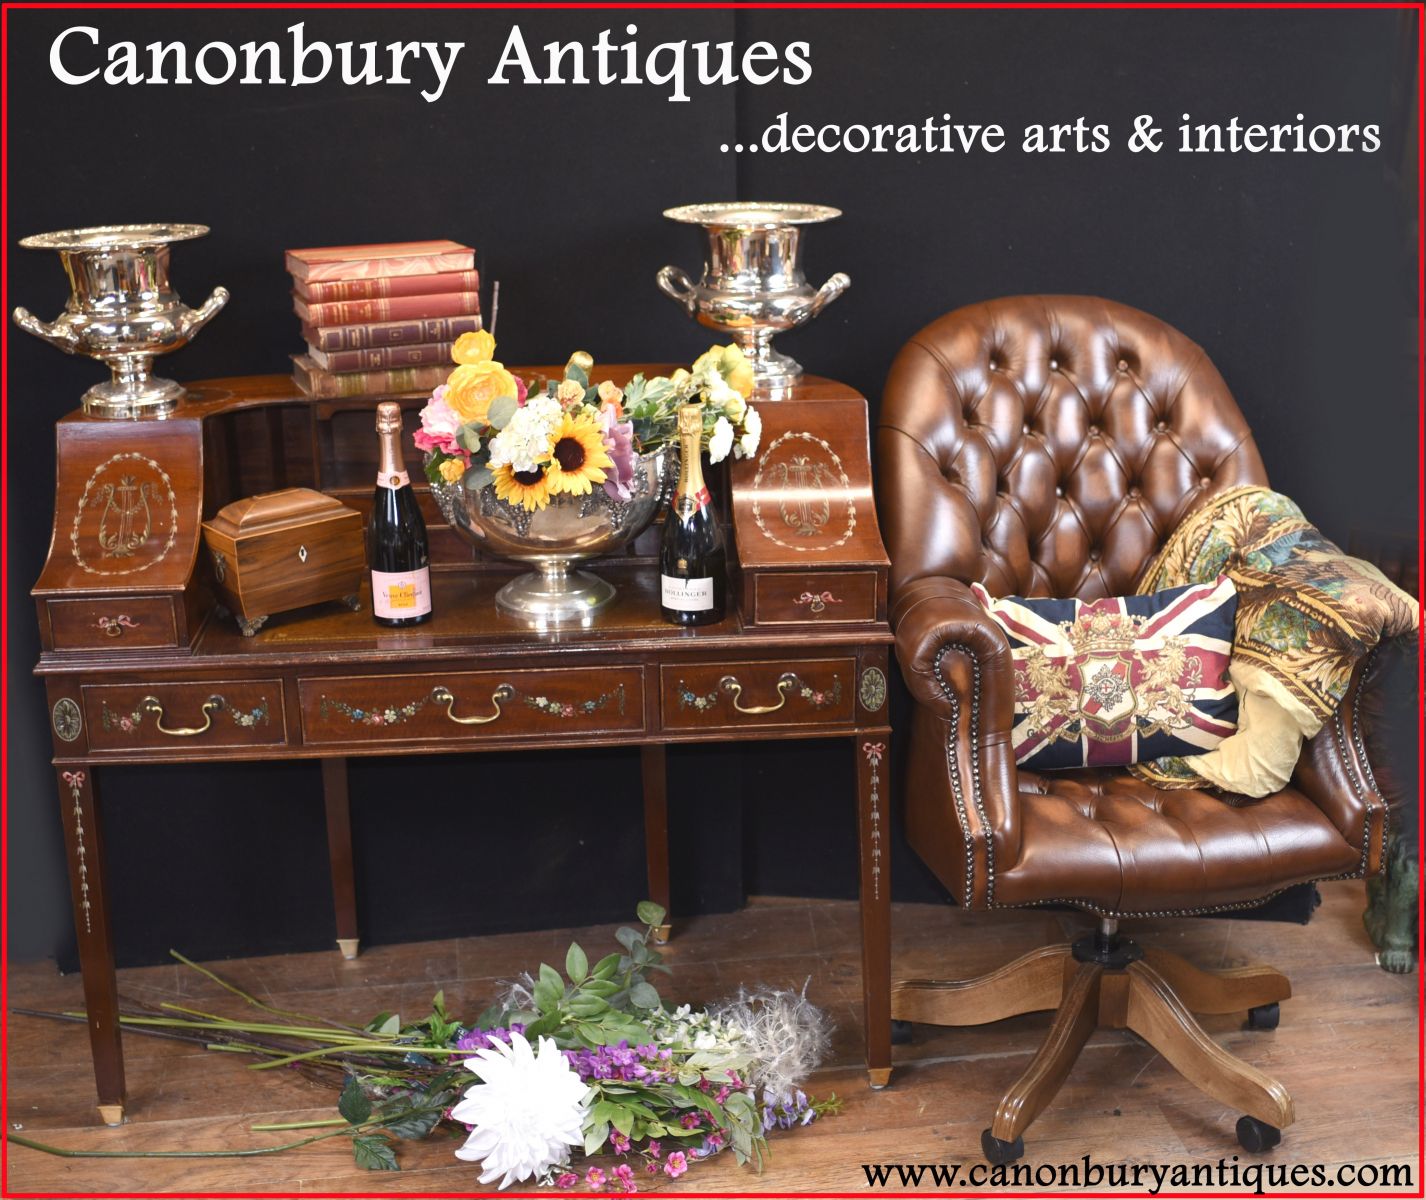 Decorative arts and interiors from Canonbury Antiques